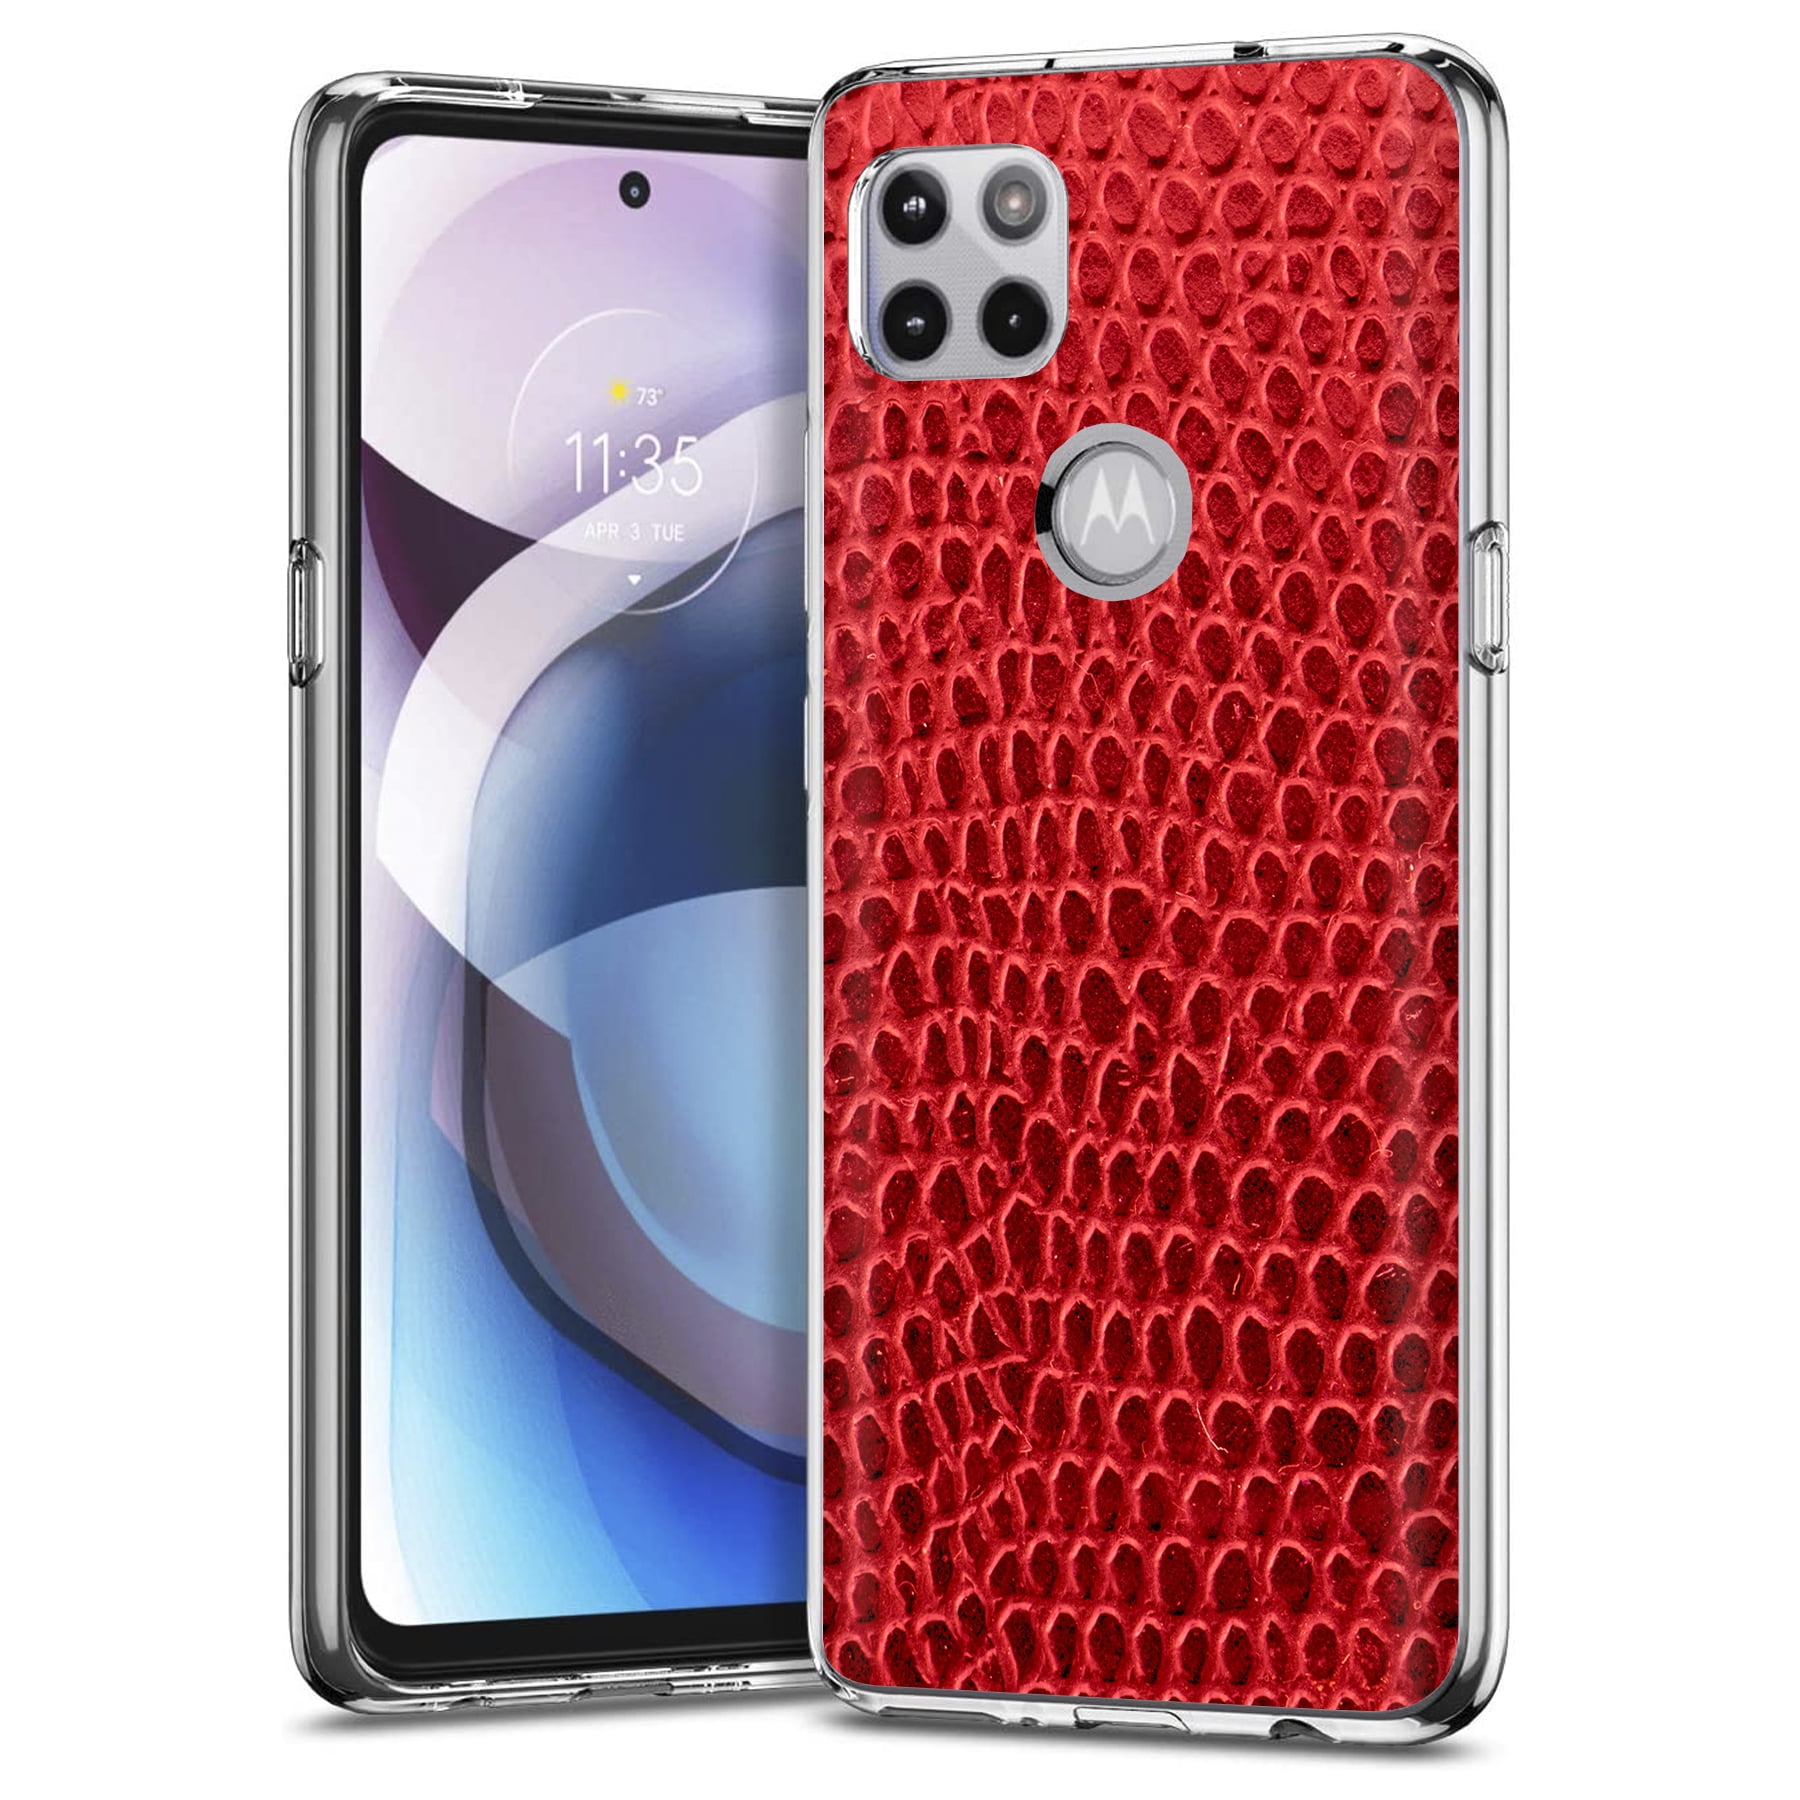 USA TalkingCase Slim Hybrid Case for Samsung Galaxy A12 5G Dual-Layer Hybrid Cover Strong Red Leather Texture Print Light Weight Slim